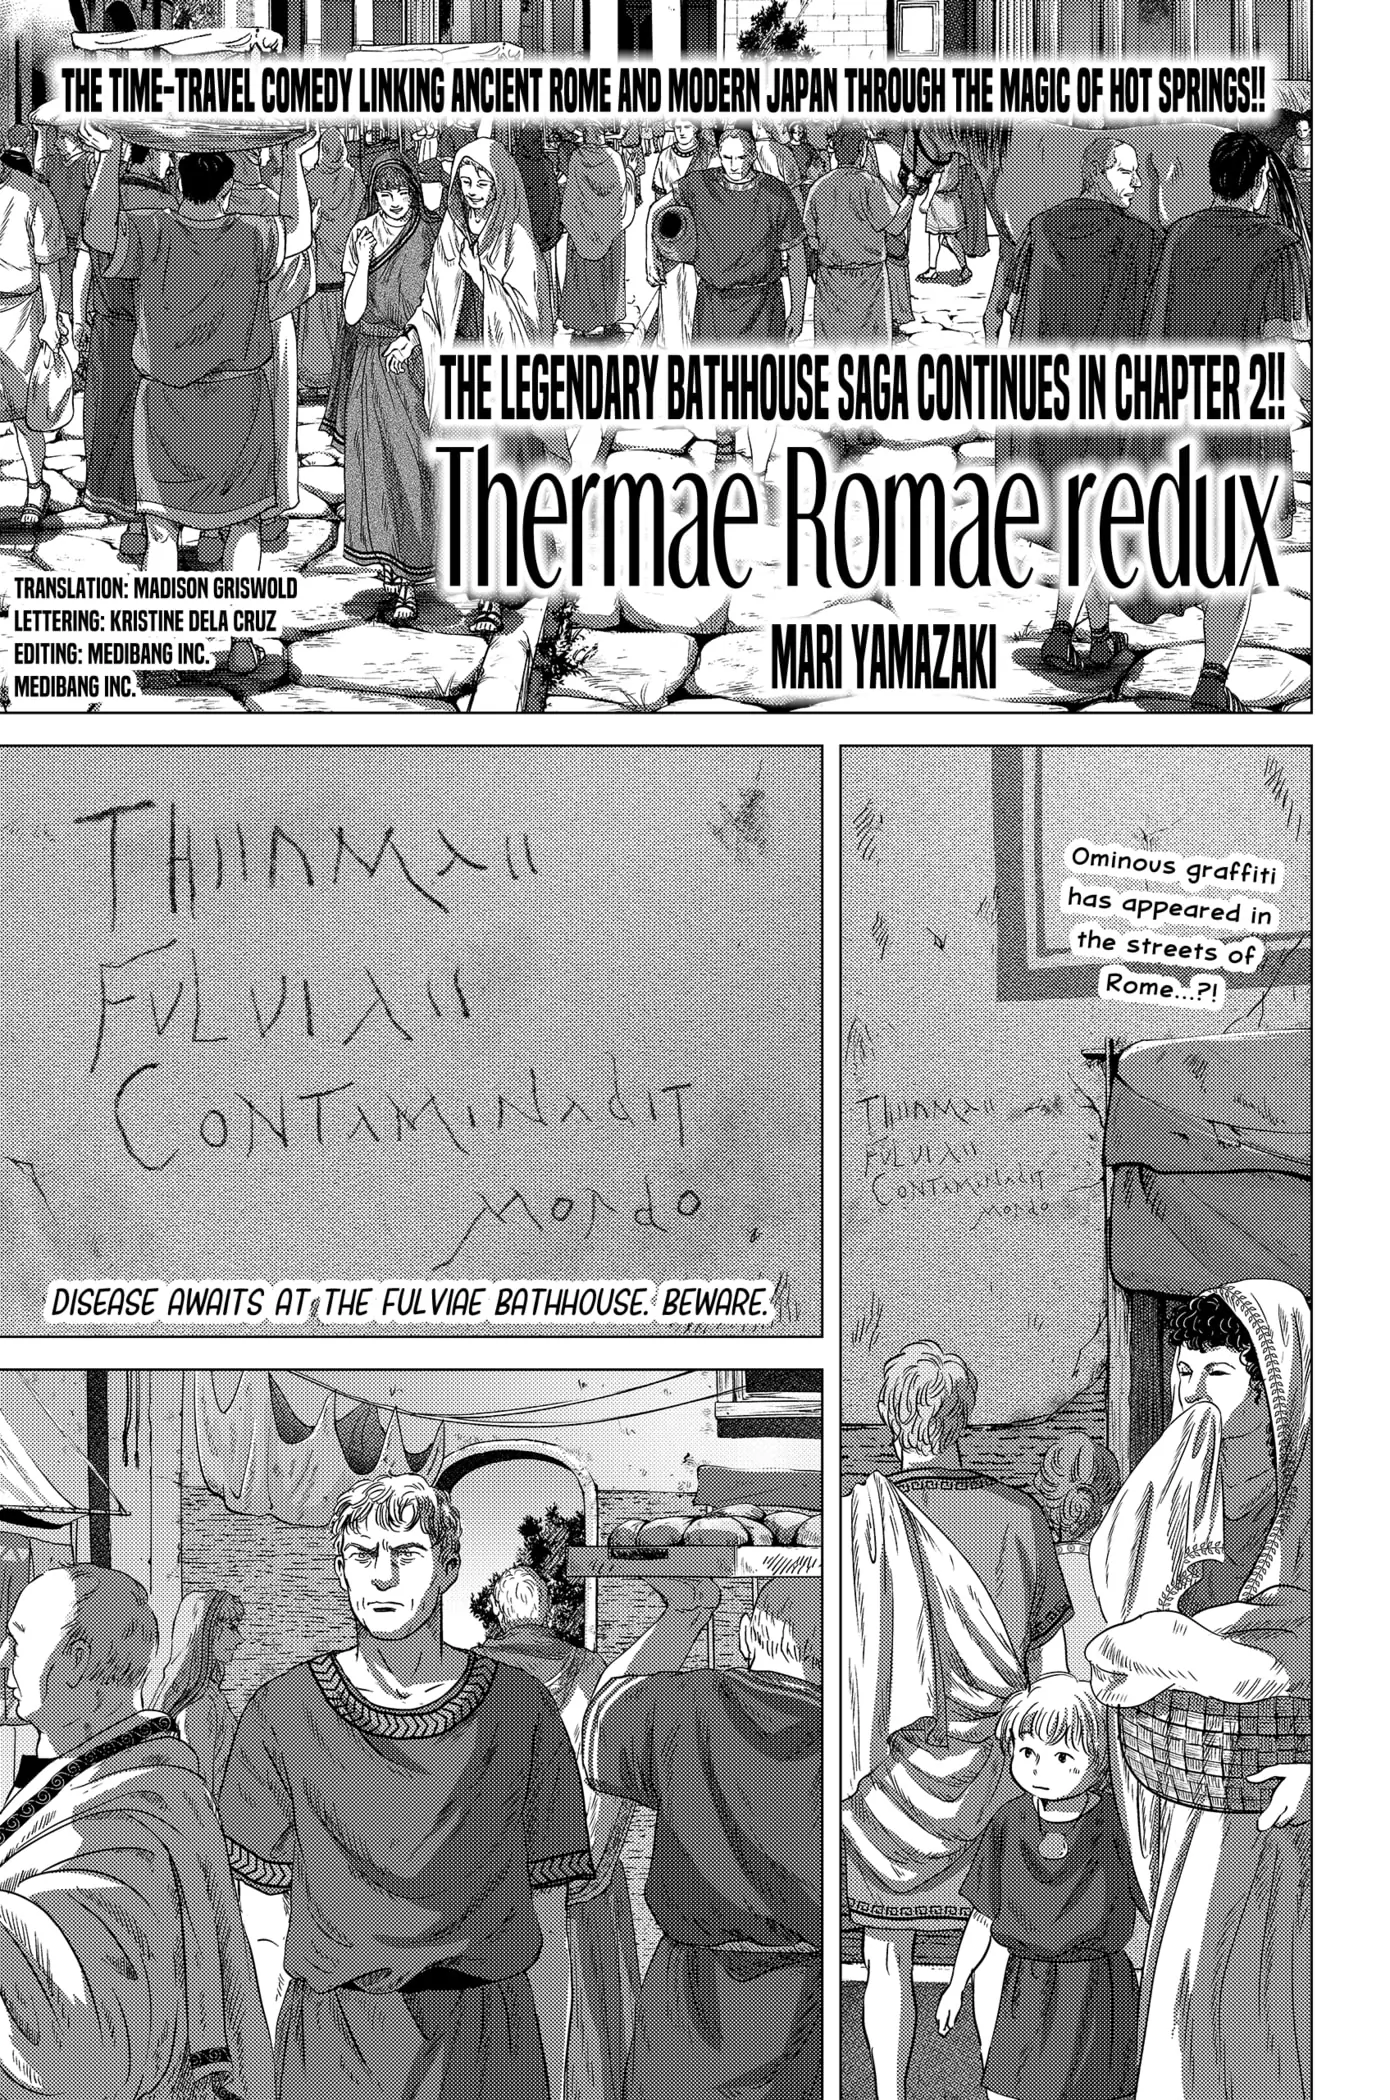 Thermae Romae redux - chapter 2 - #1